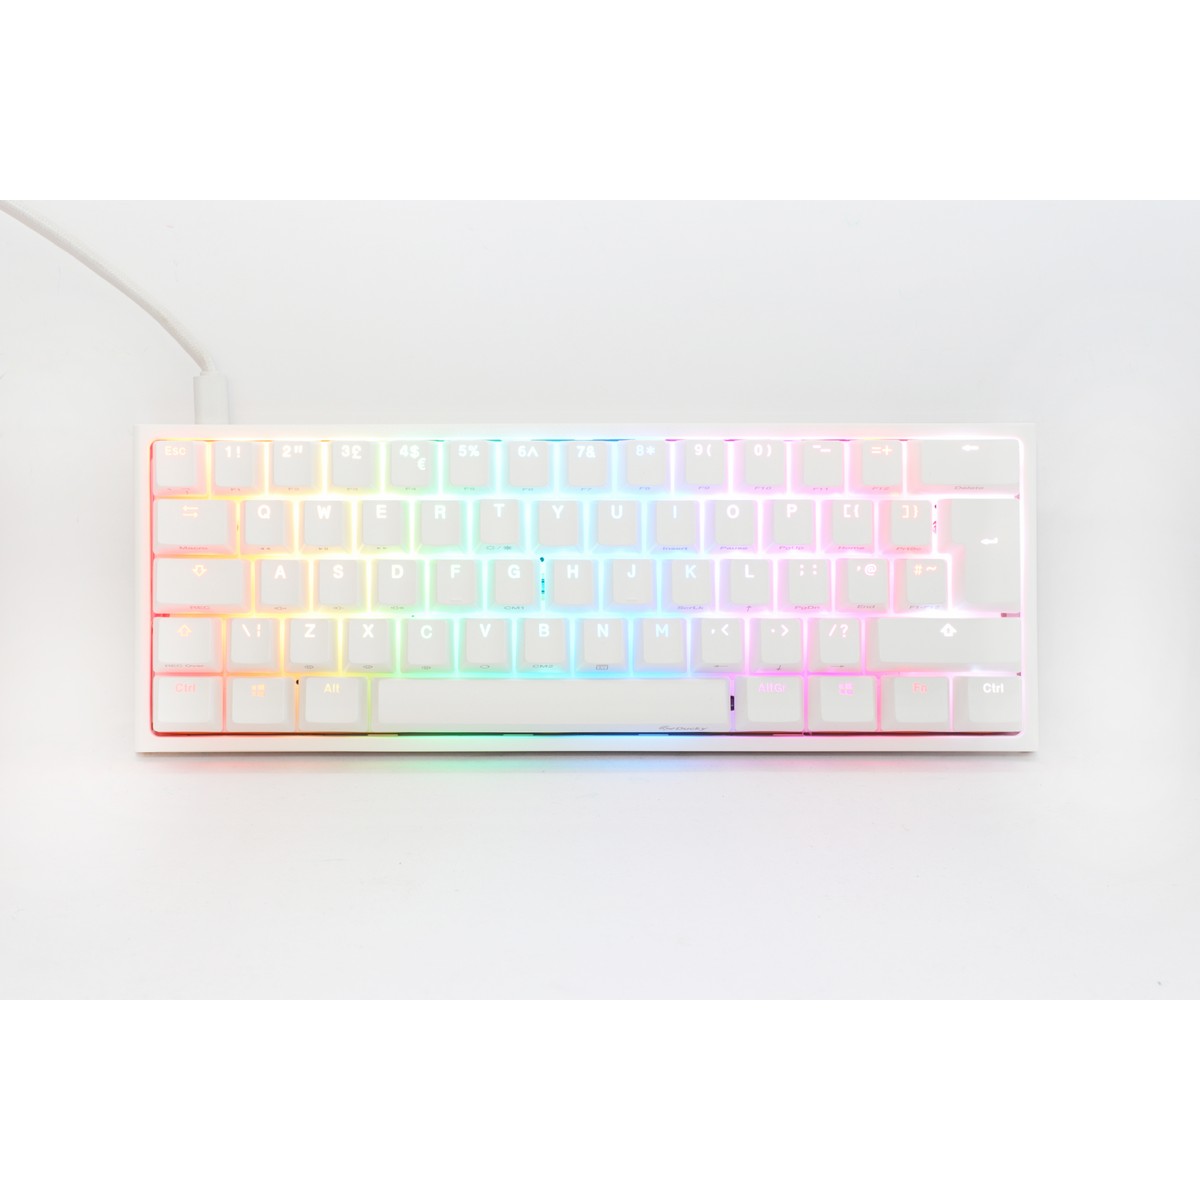 Ducky One 2 Pro Mini 60% Mechanical Gaming Keyboard MX Cherry Brown Switch White Frame - UK Layout